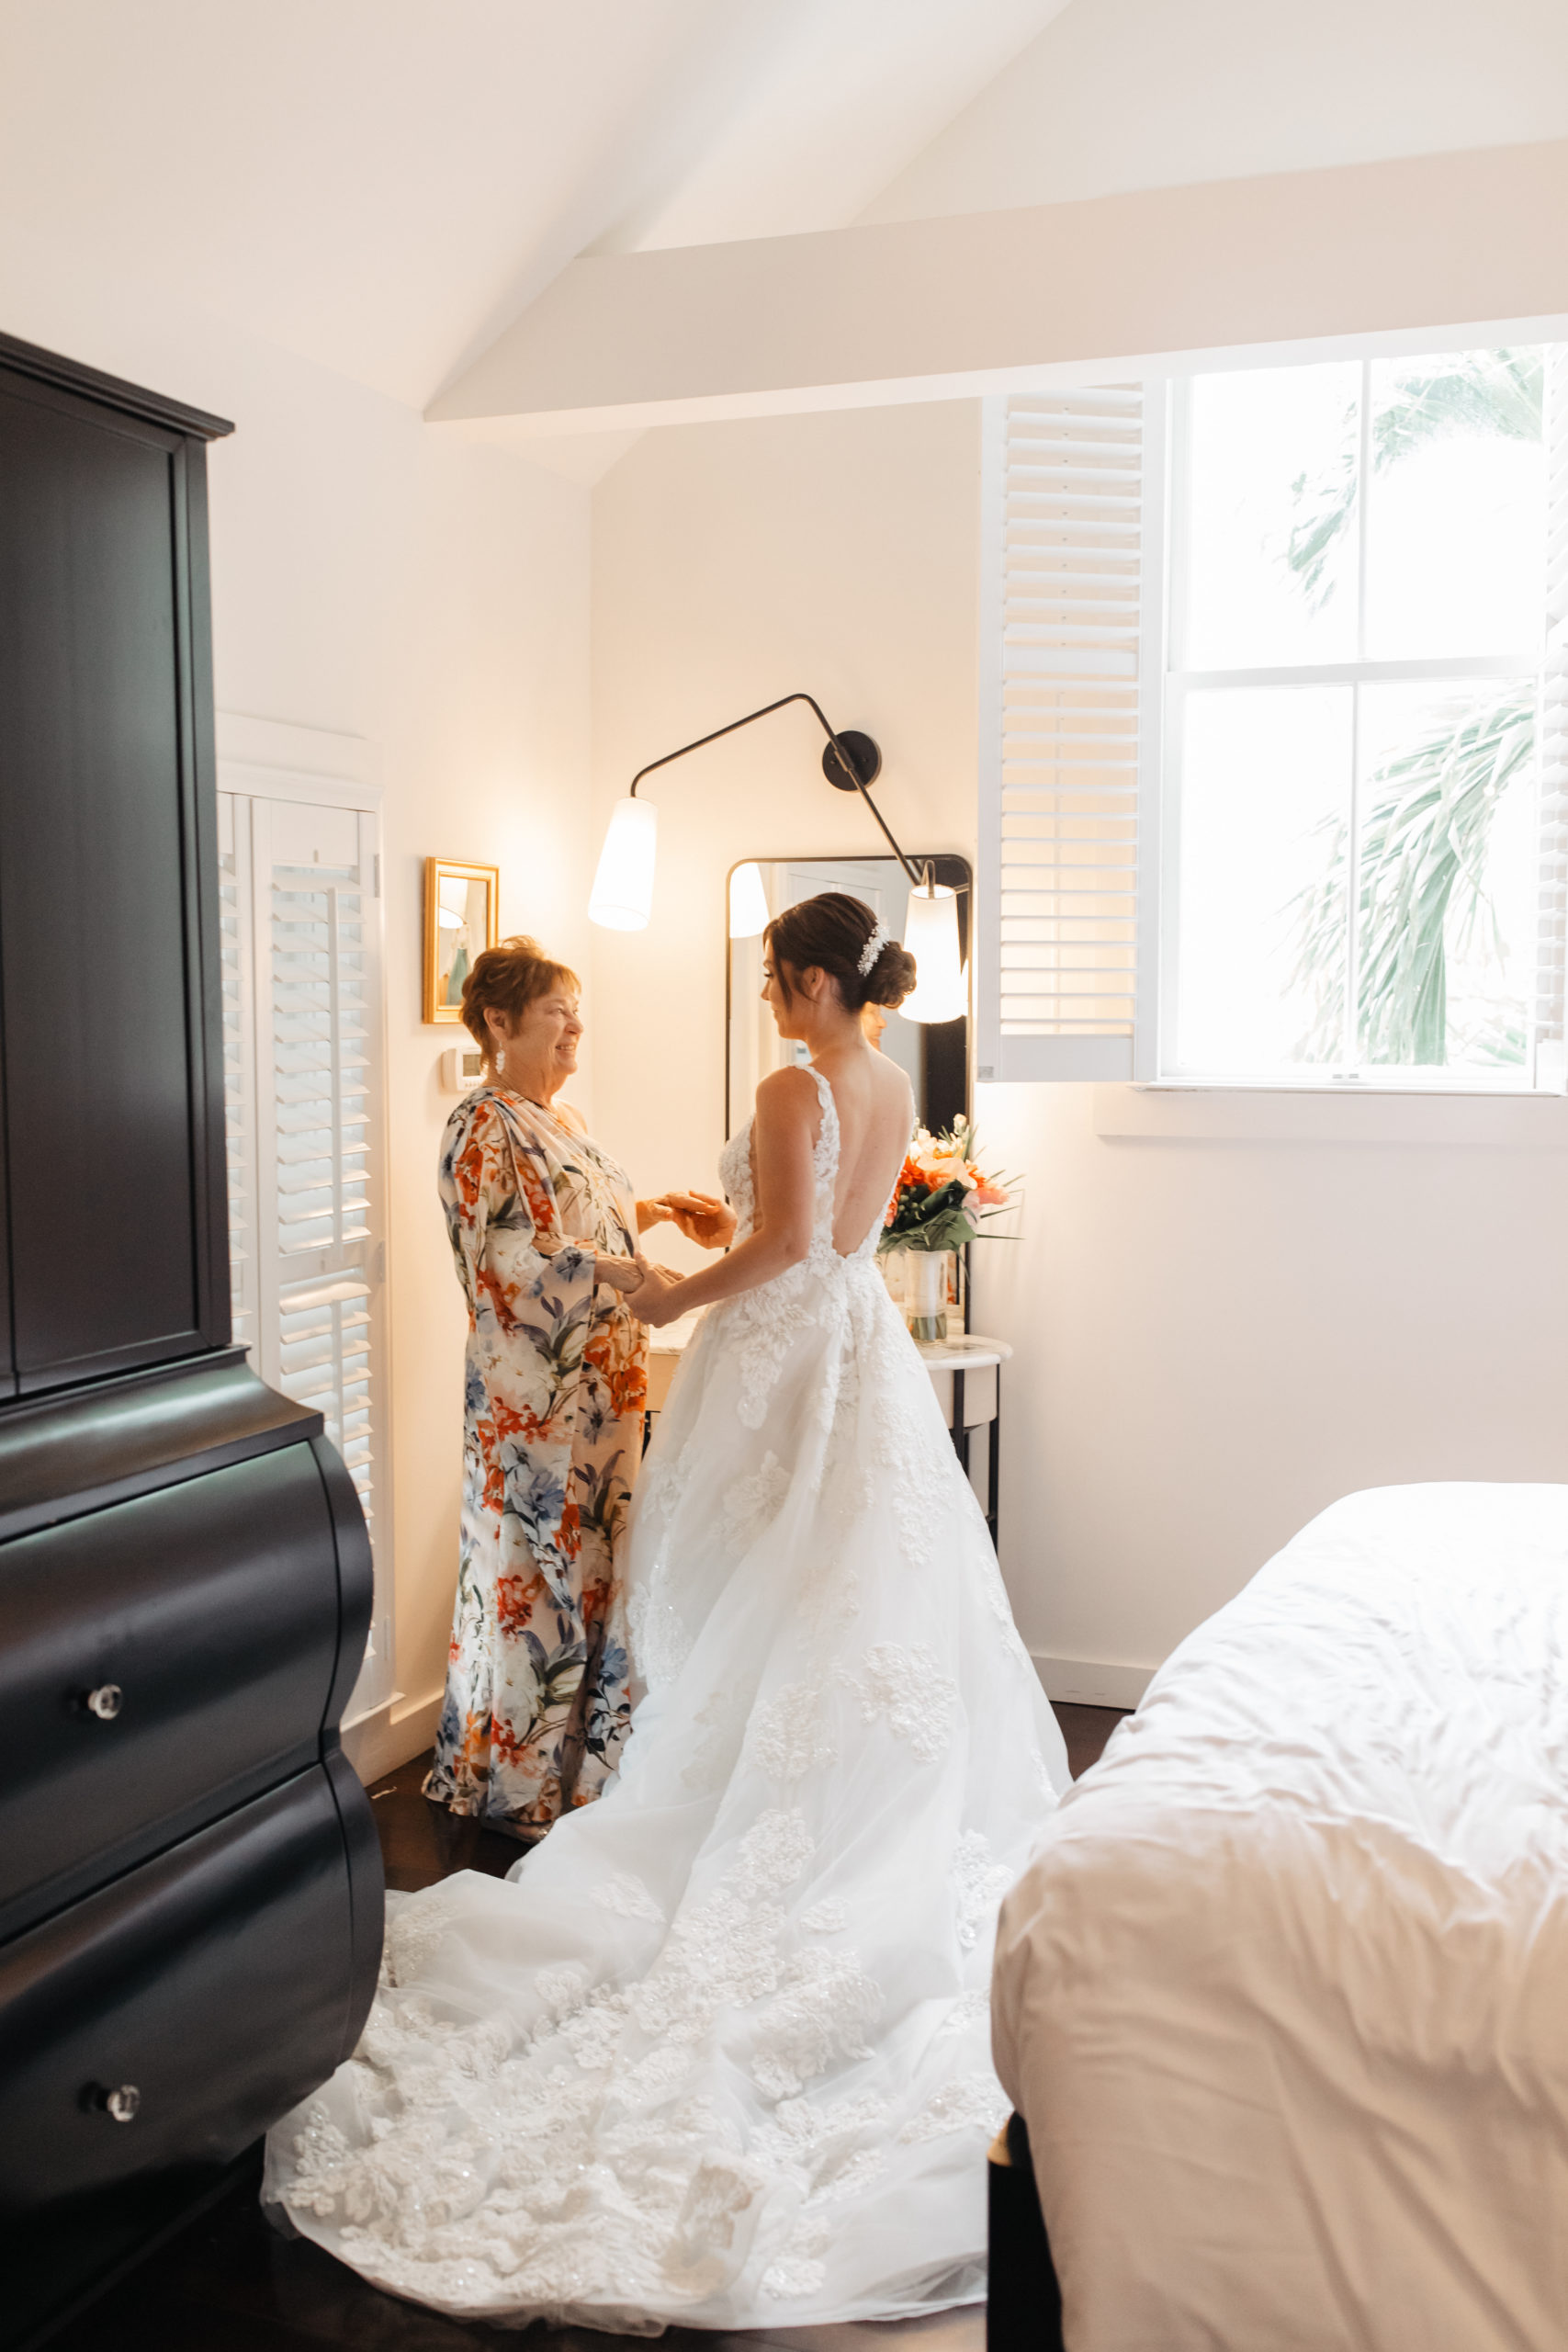 the bride and her mother stand together for the getting ready photos